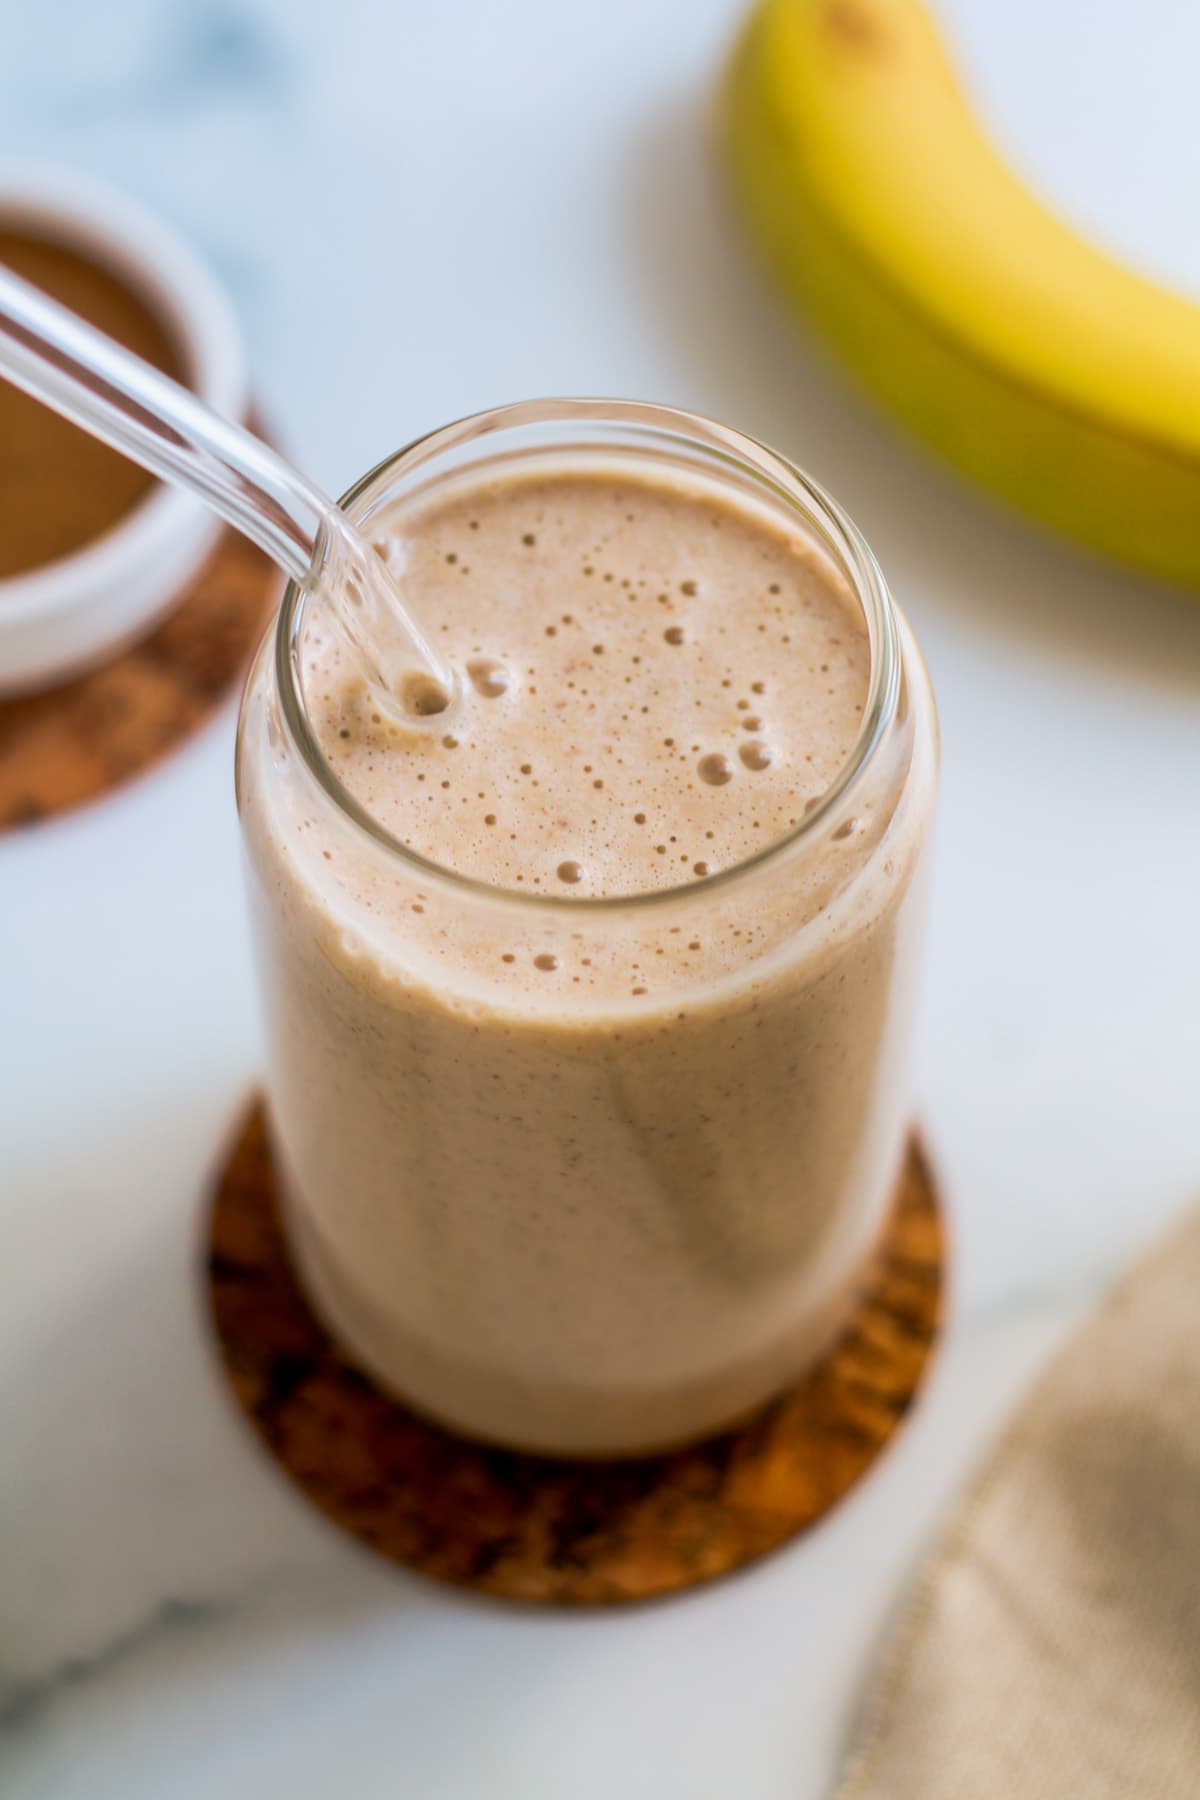 A glass filled with Banana Almond Butter Smoothie.